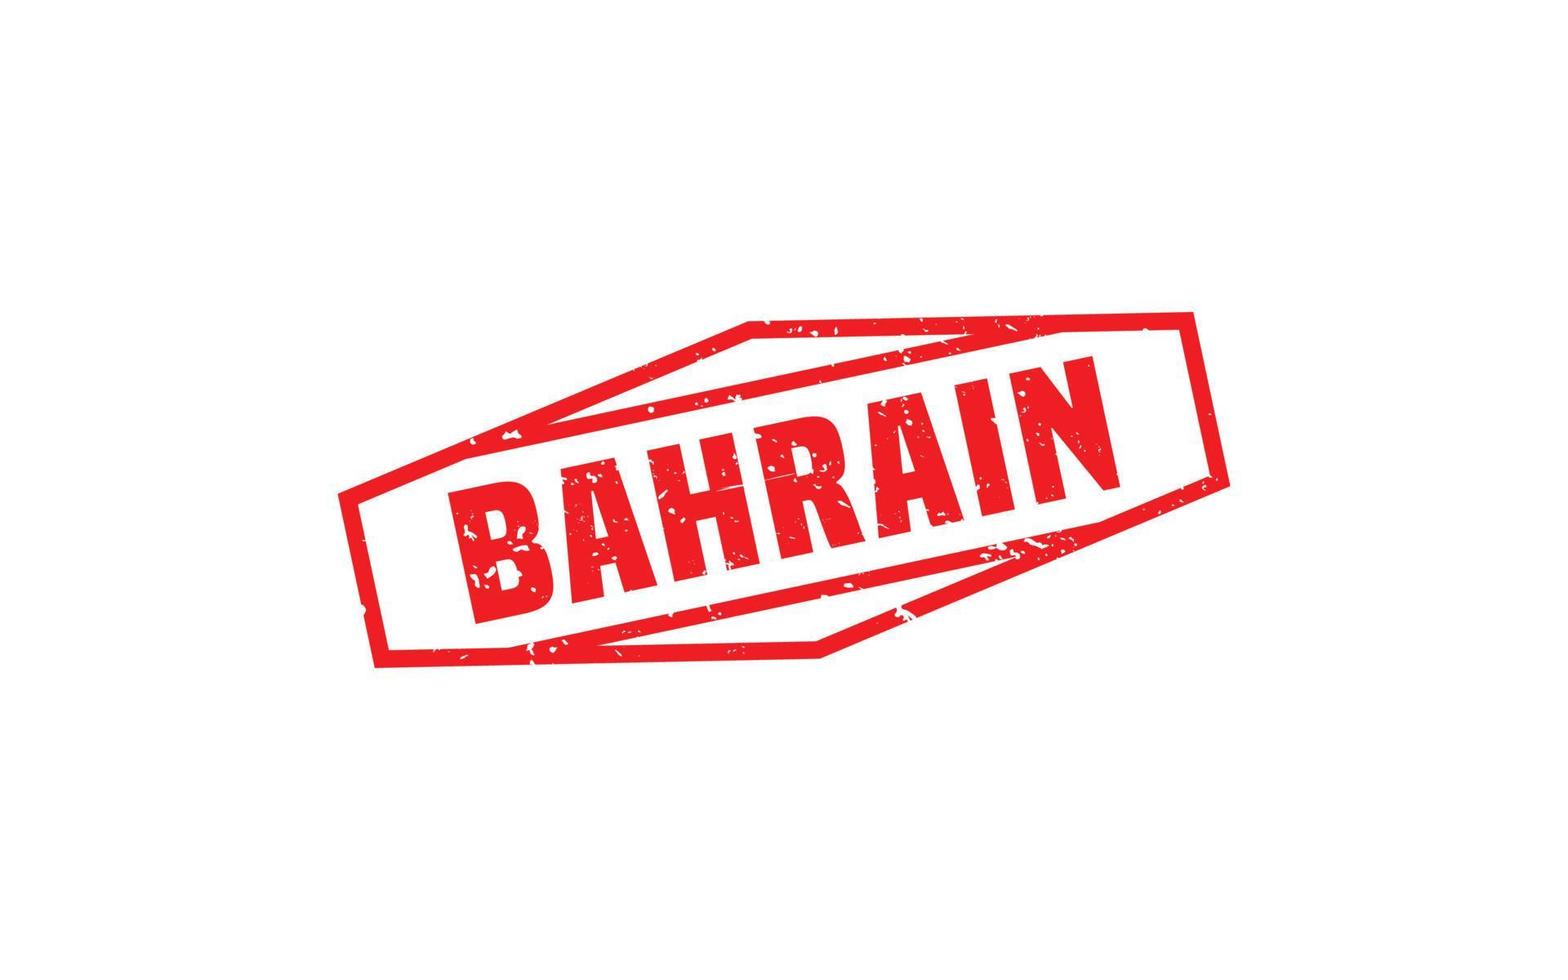 BAHRAIN stamp rubber with grunge style on white background vector